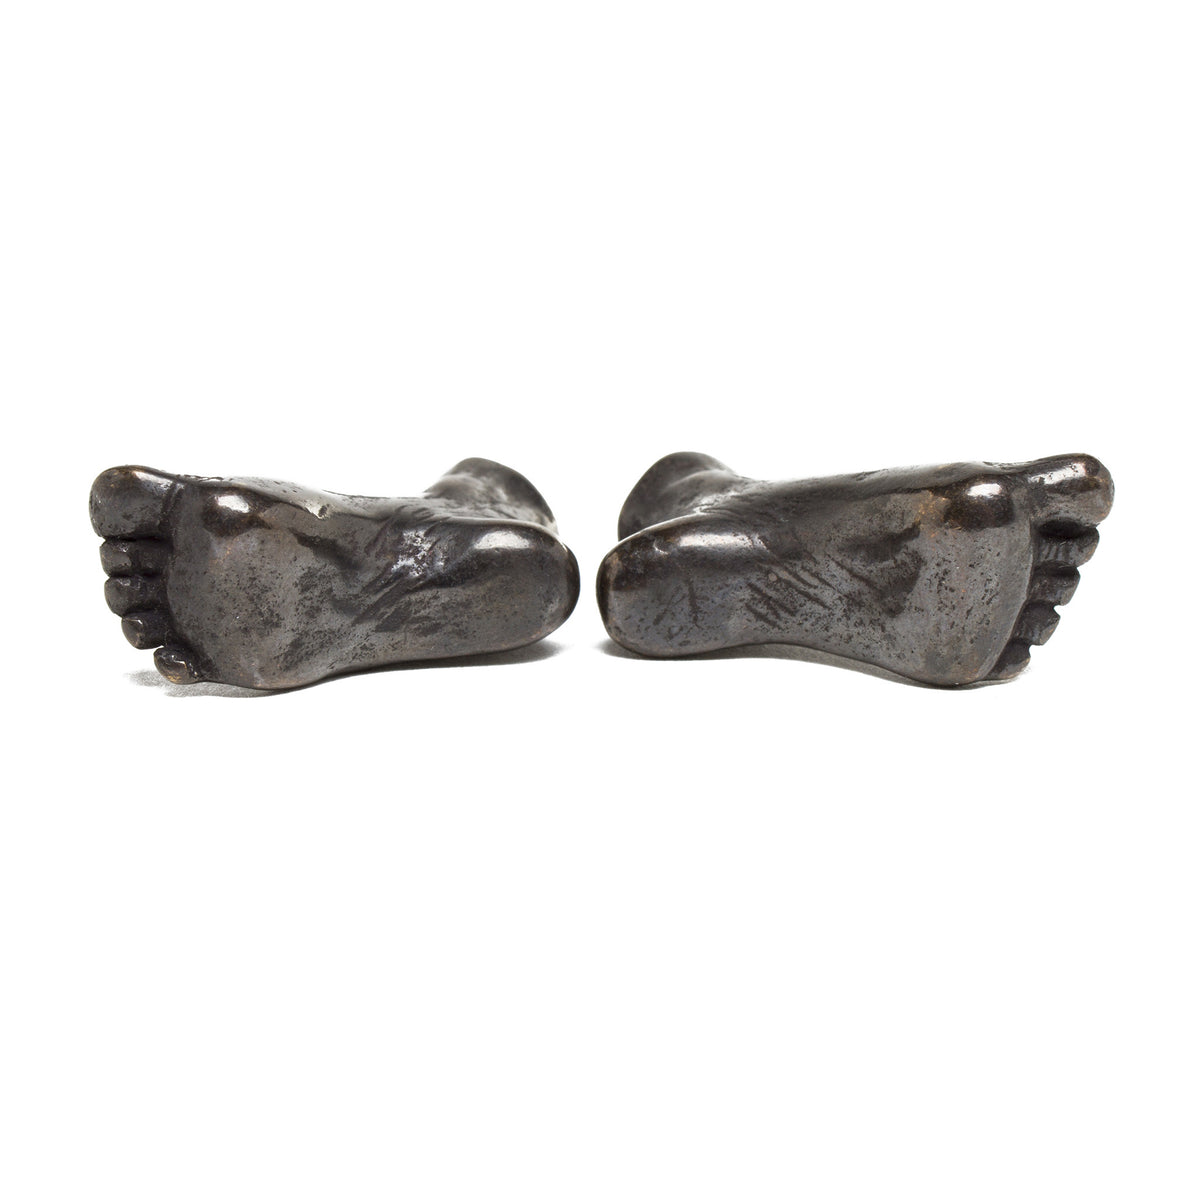 Pair of Miniature cast Bronze Arched Feet | Getty Store